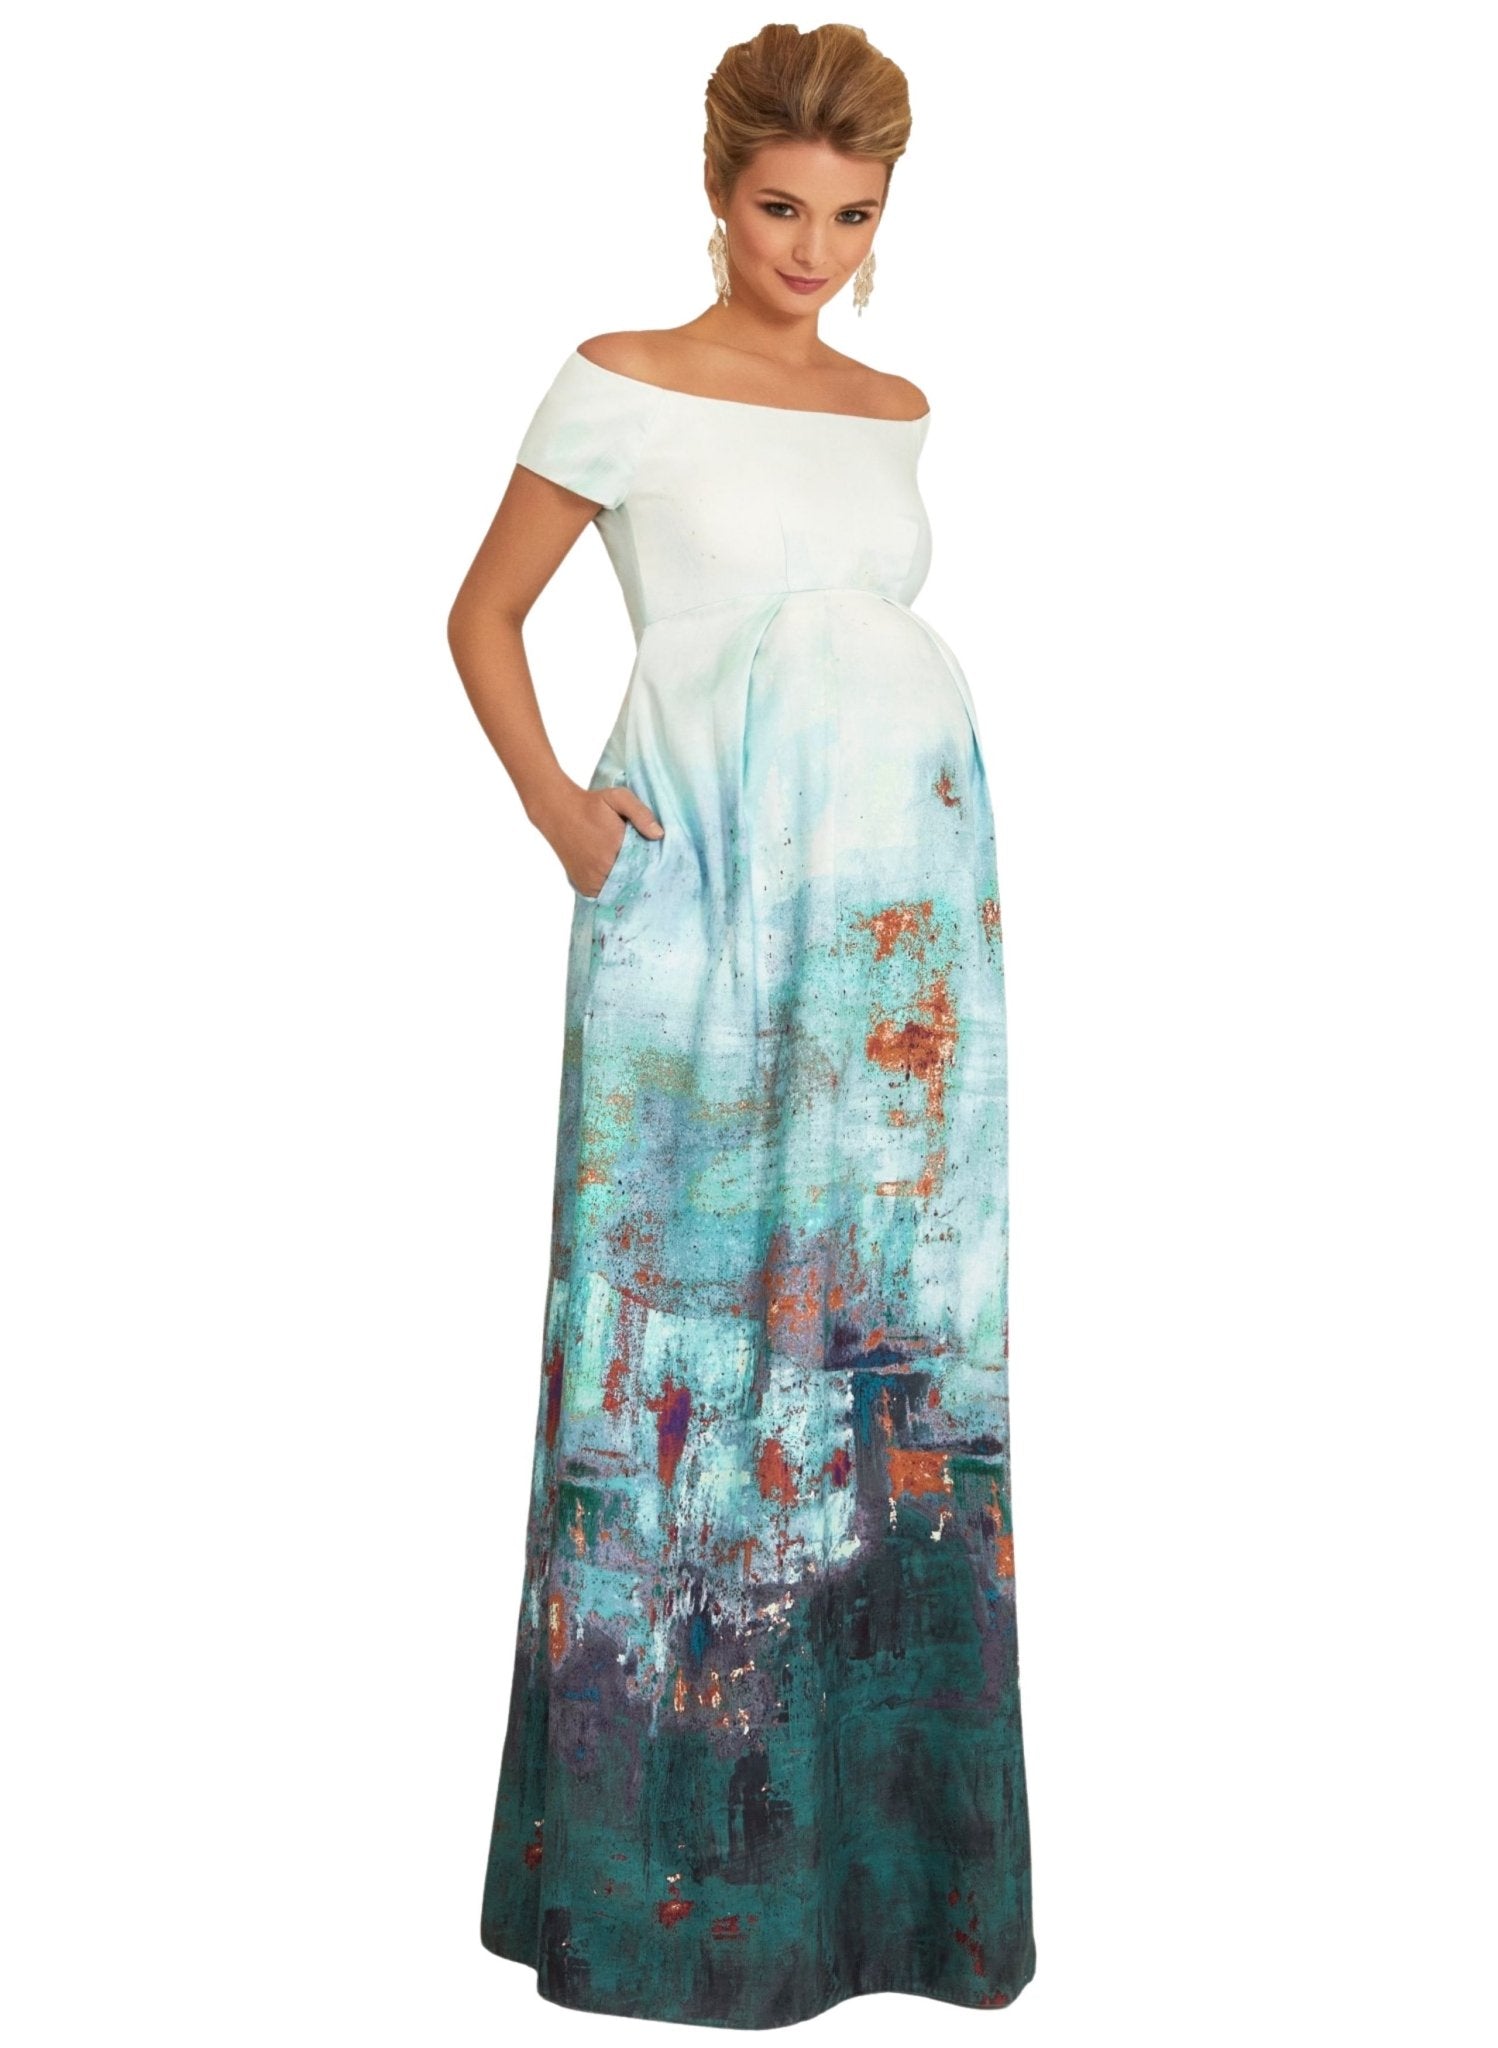 Aria Maternity Gown - Aquatic Ombre - Mums and Bumps